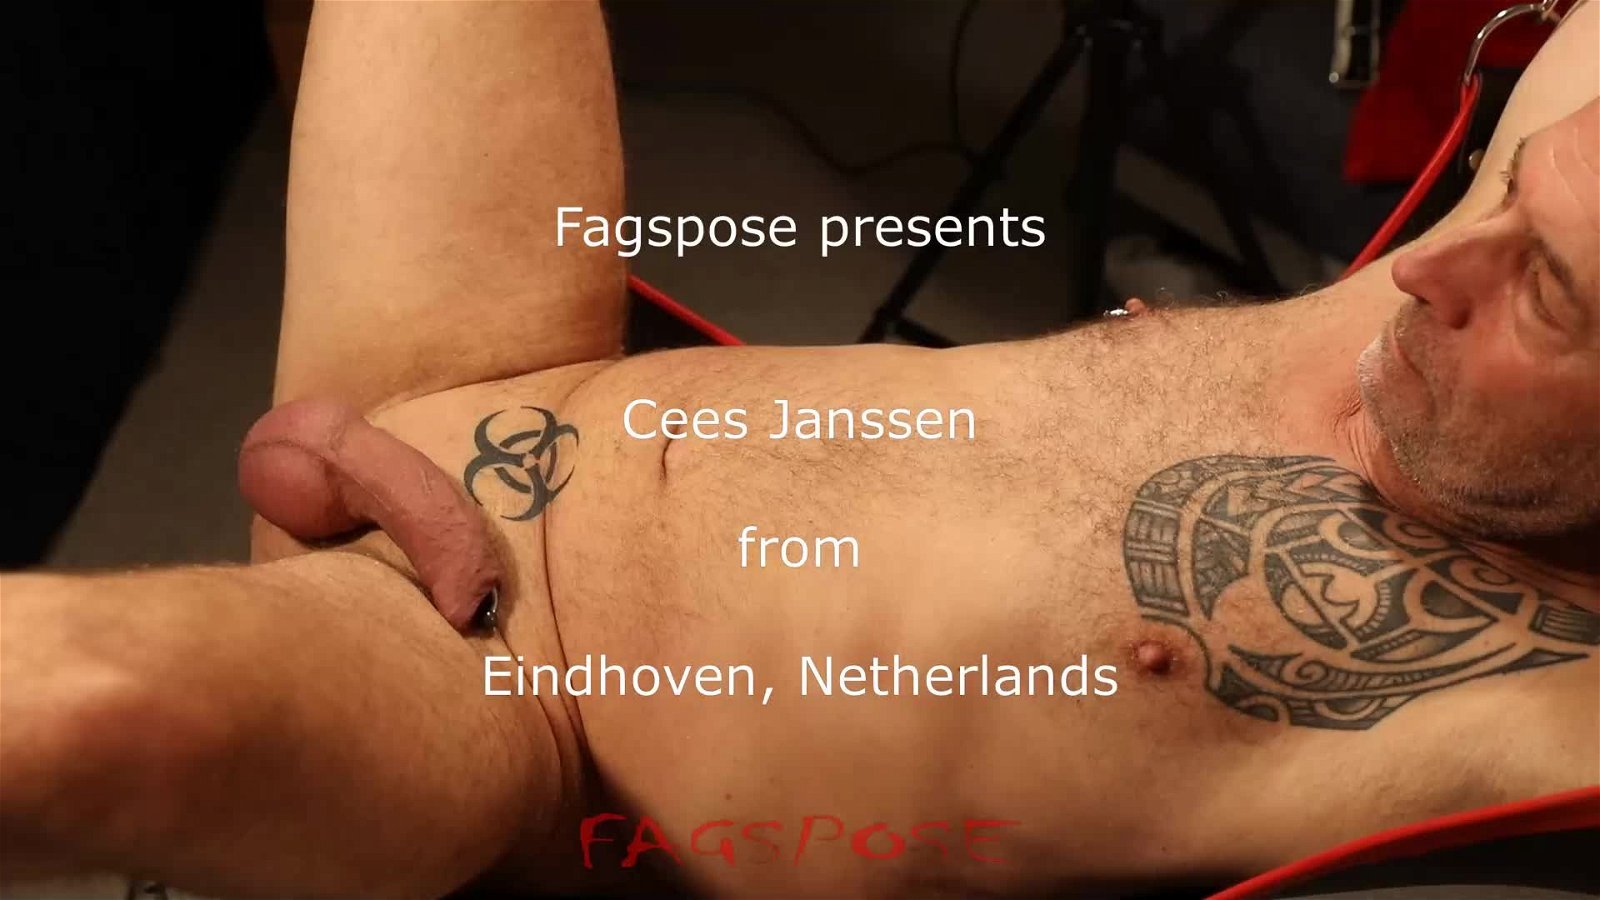 Video by Fagspose with the username @Fagspose, who is a brand user,  January 11, 2024 at 1:44 PM. The post is about the topic Fagpose = fags expose(d) and the text says 'Cees Janssen from Eindhoven (Netherlands) - Candle wax, CBT, TT, piss and cum.

See Cees Janssen's full exposure on https://fagspose.com/cees-janssen-eindhoven-netherlands/'